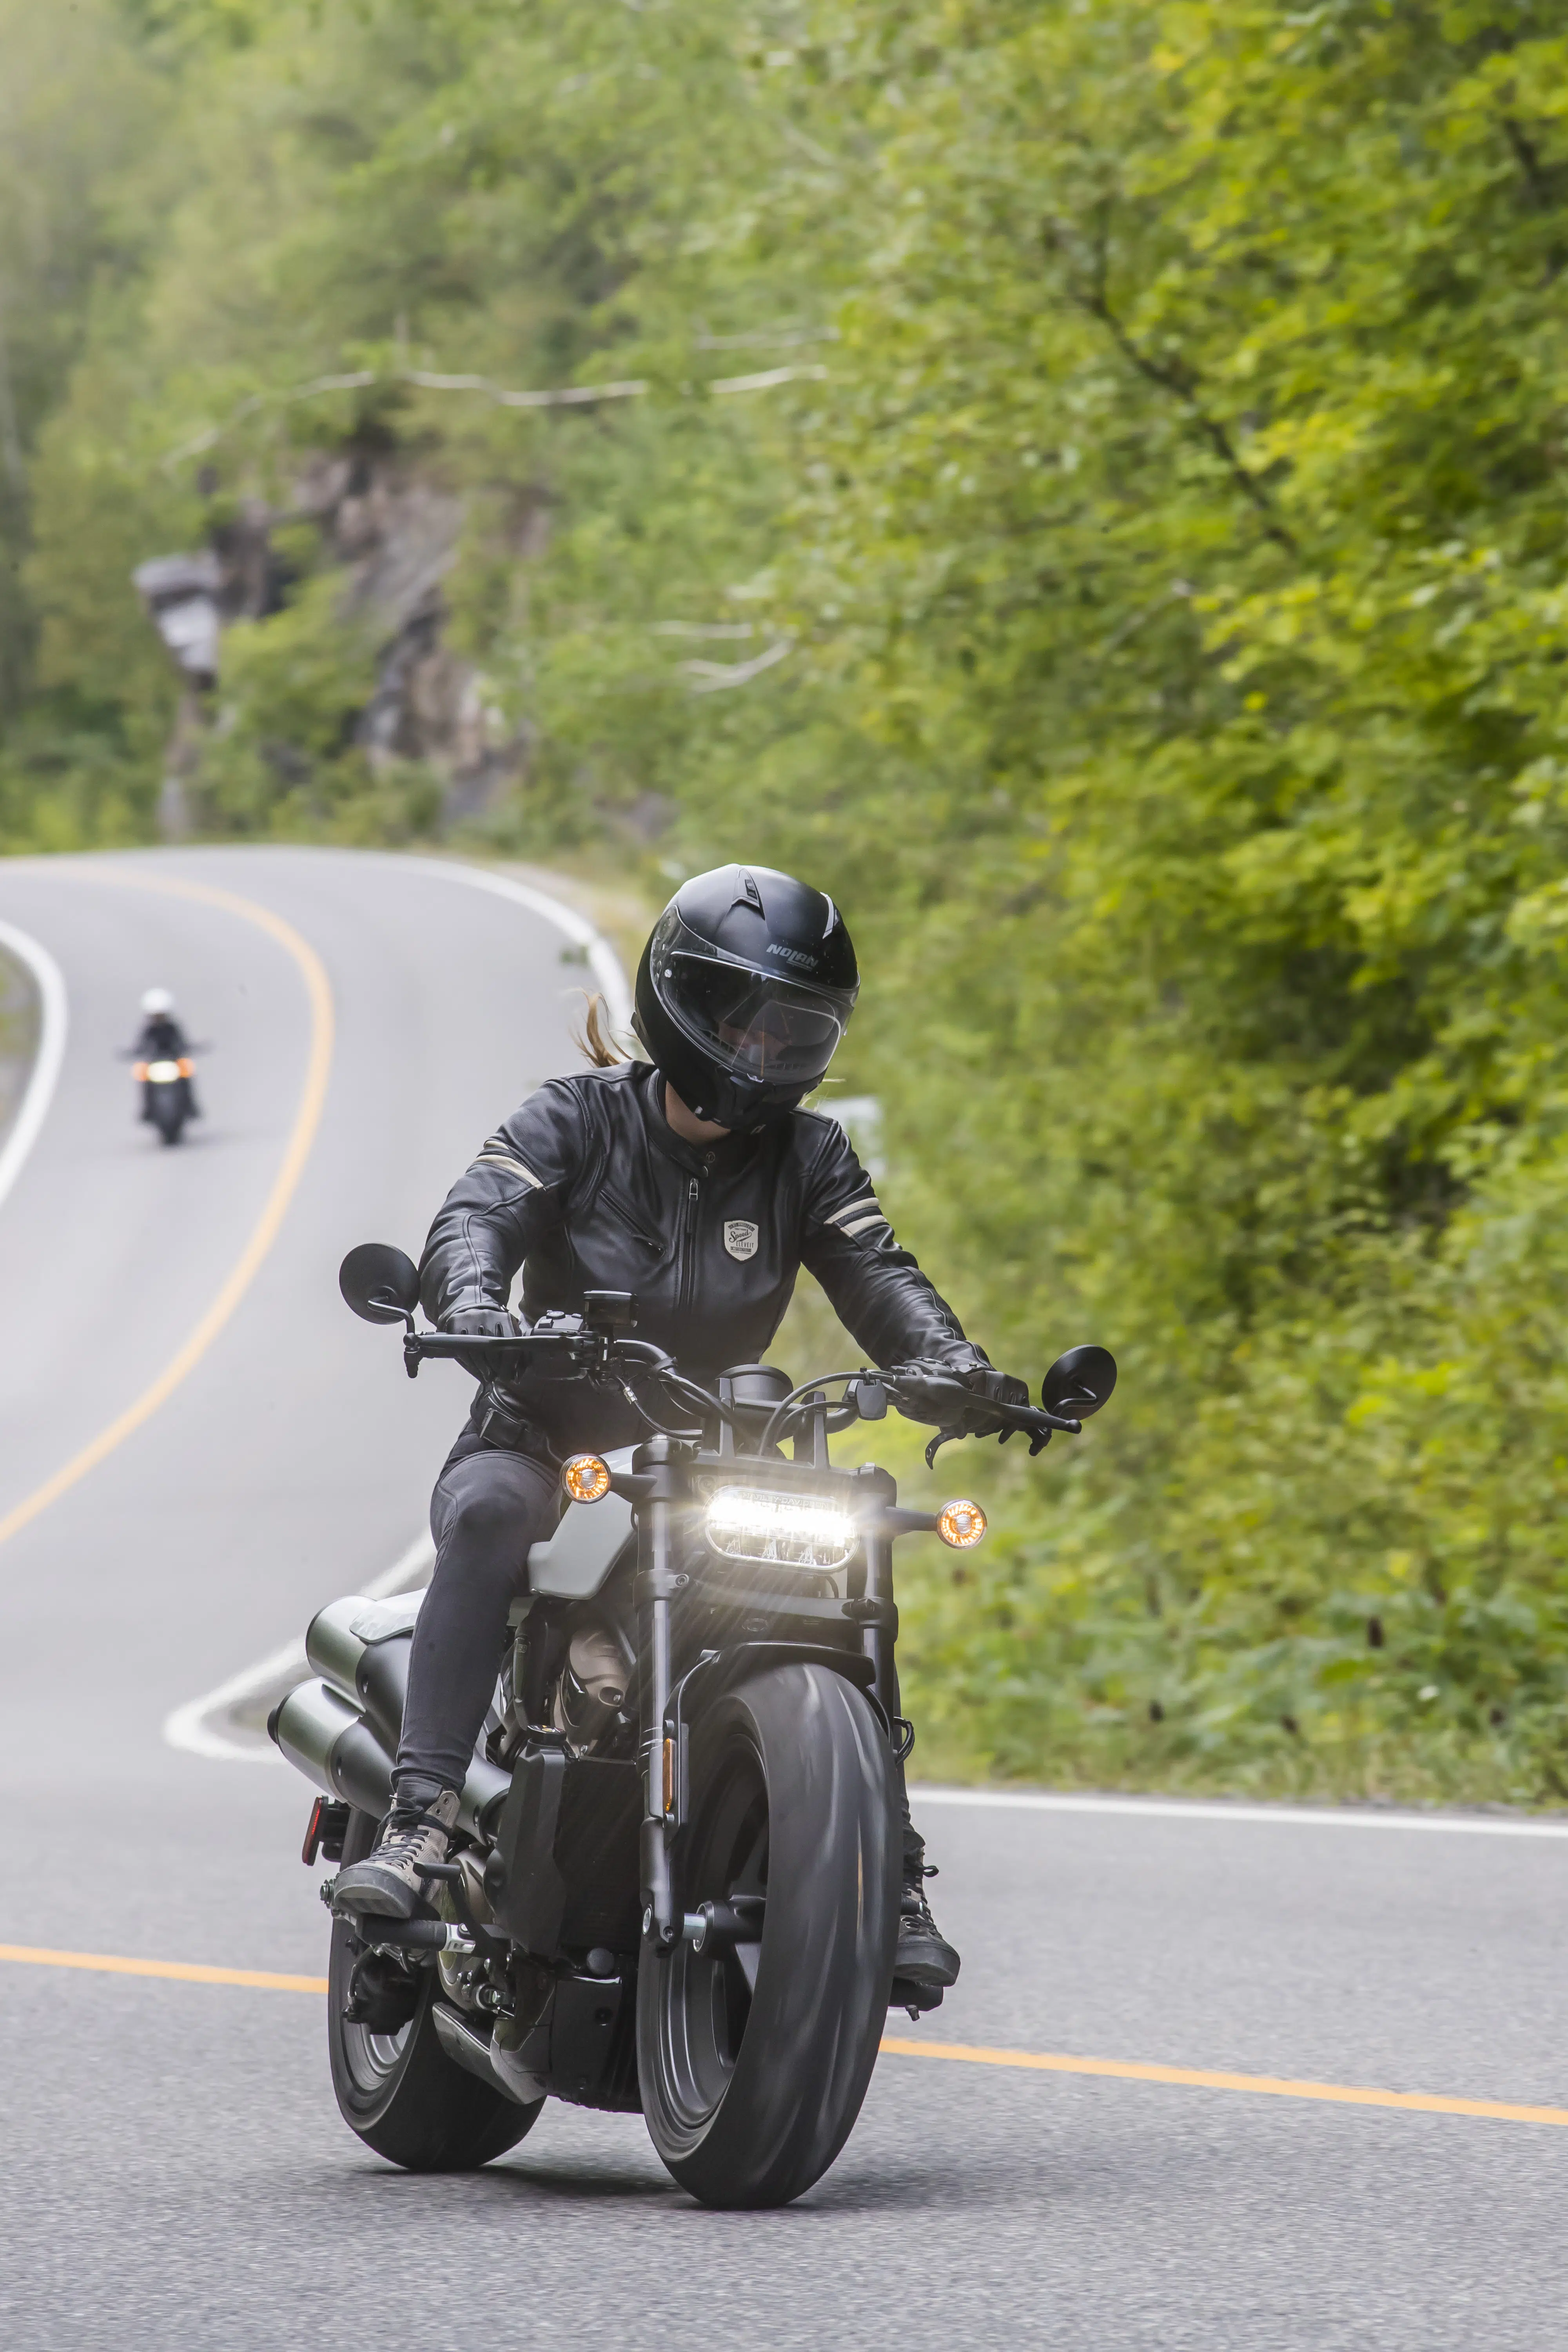 Cyndi fell in love with the bobber style of the 2021 Sportster S.